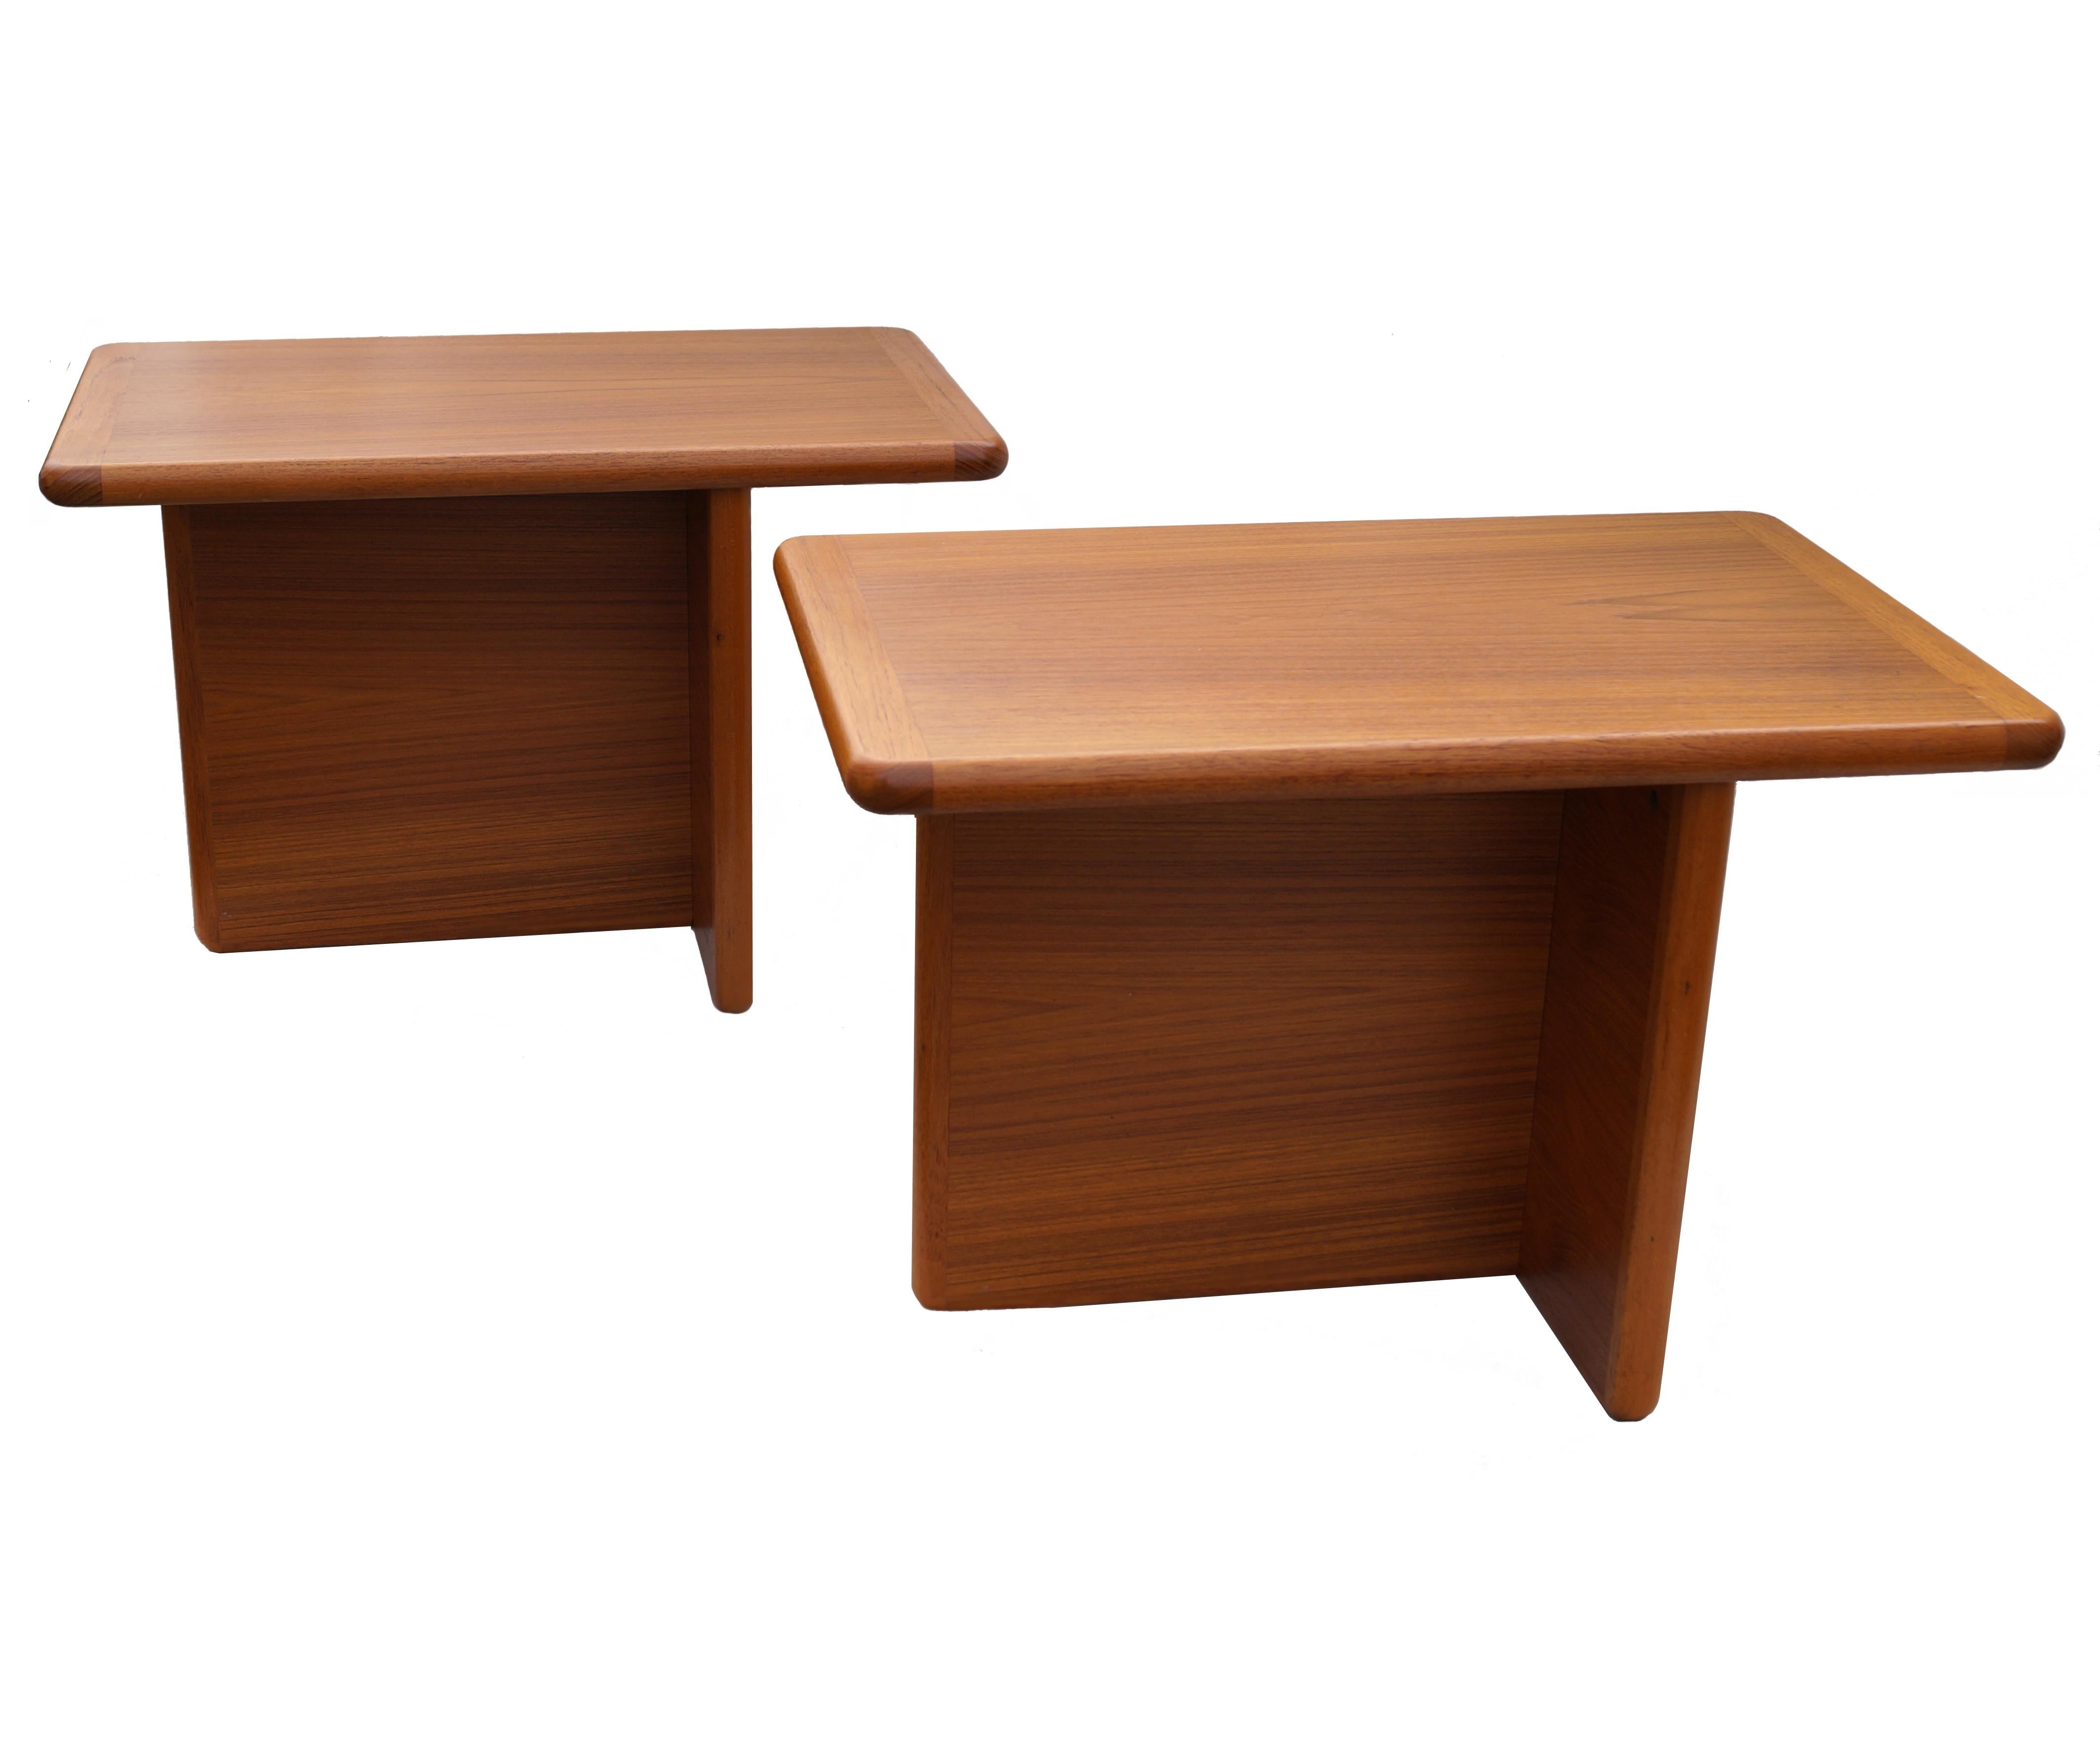 Pair of Unusual Danish Scandinavian Teak End Side Tables. These you can use in many directions, to get different looks
If you are in the New Jersey, New York City Metro Area, please contact us with your delivery zipcode, as we may be able to deliver